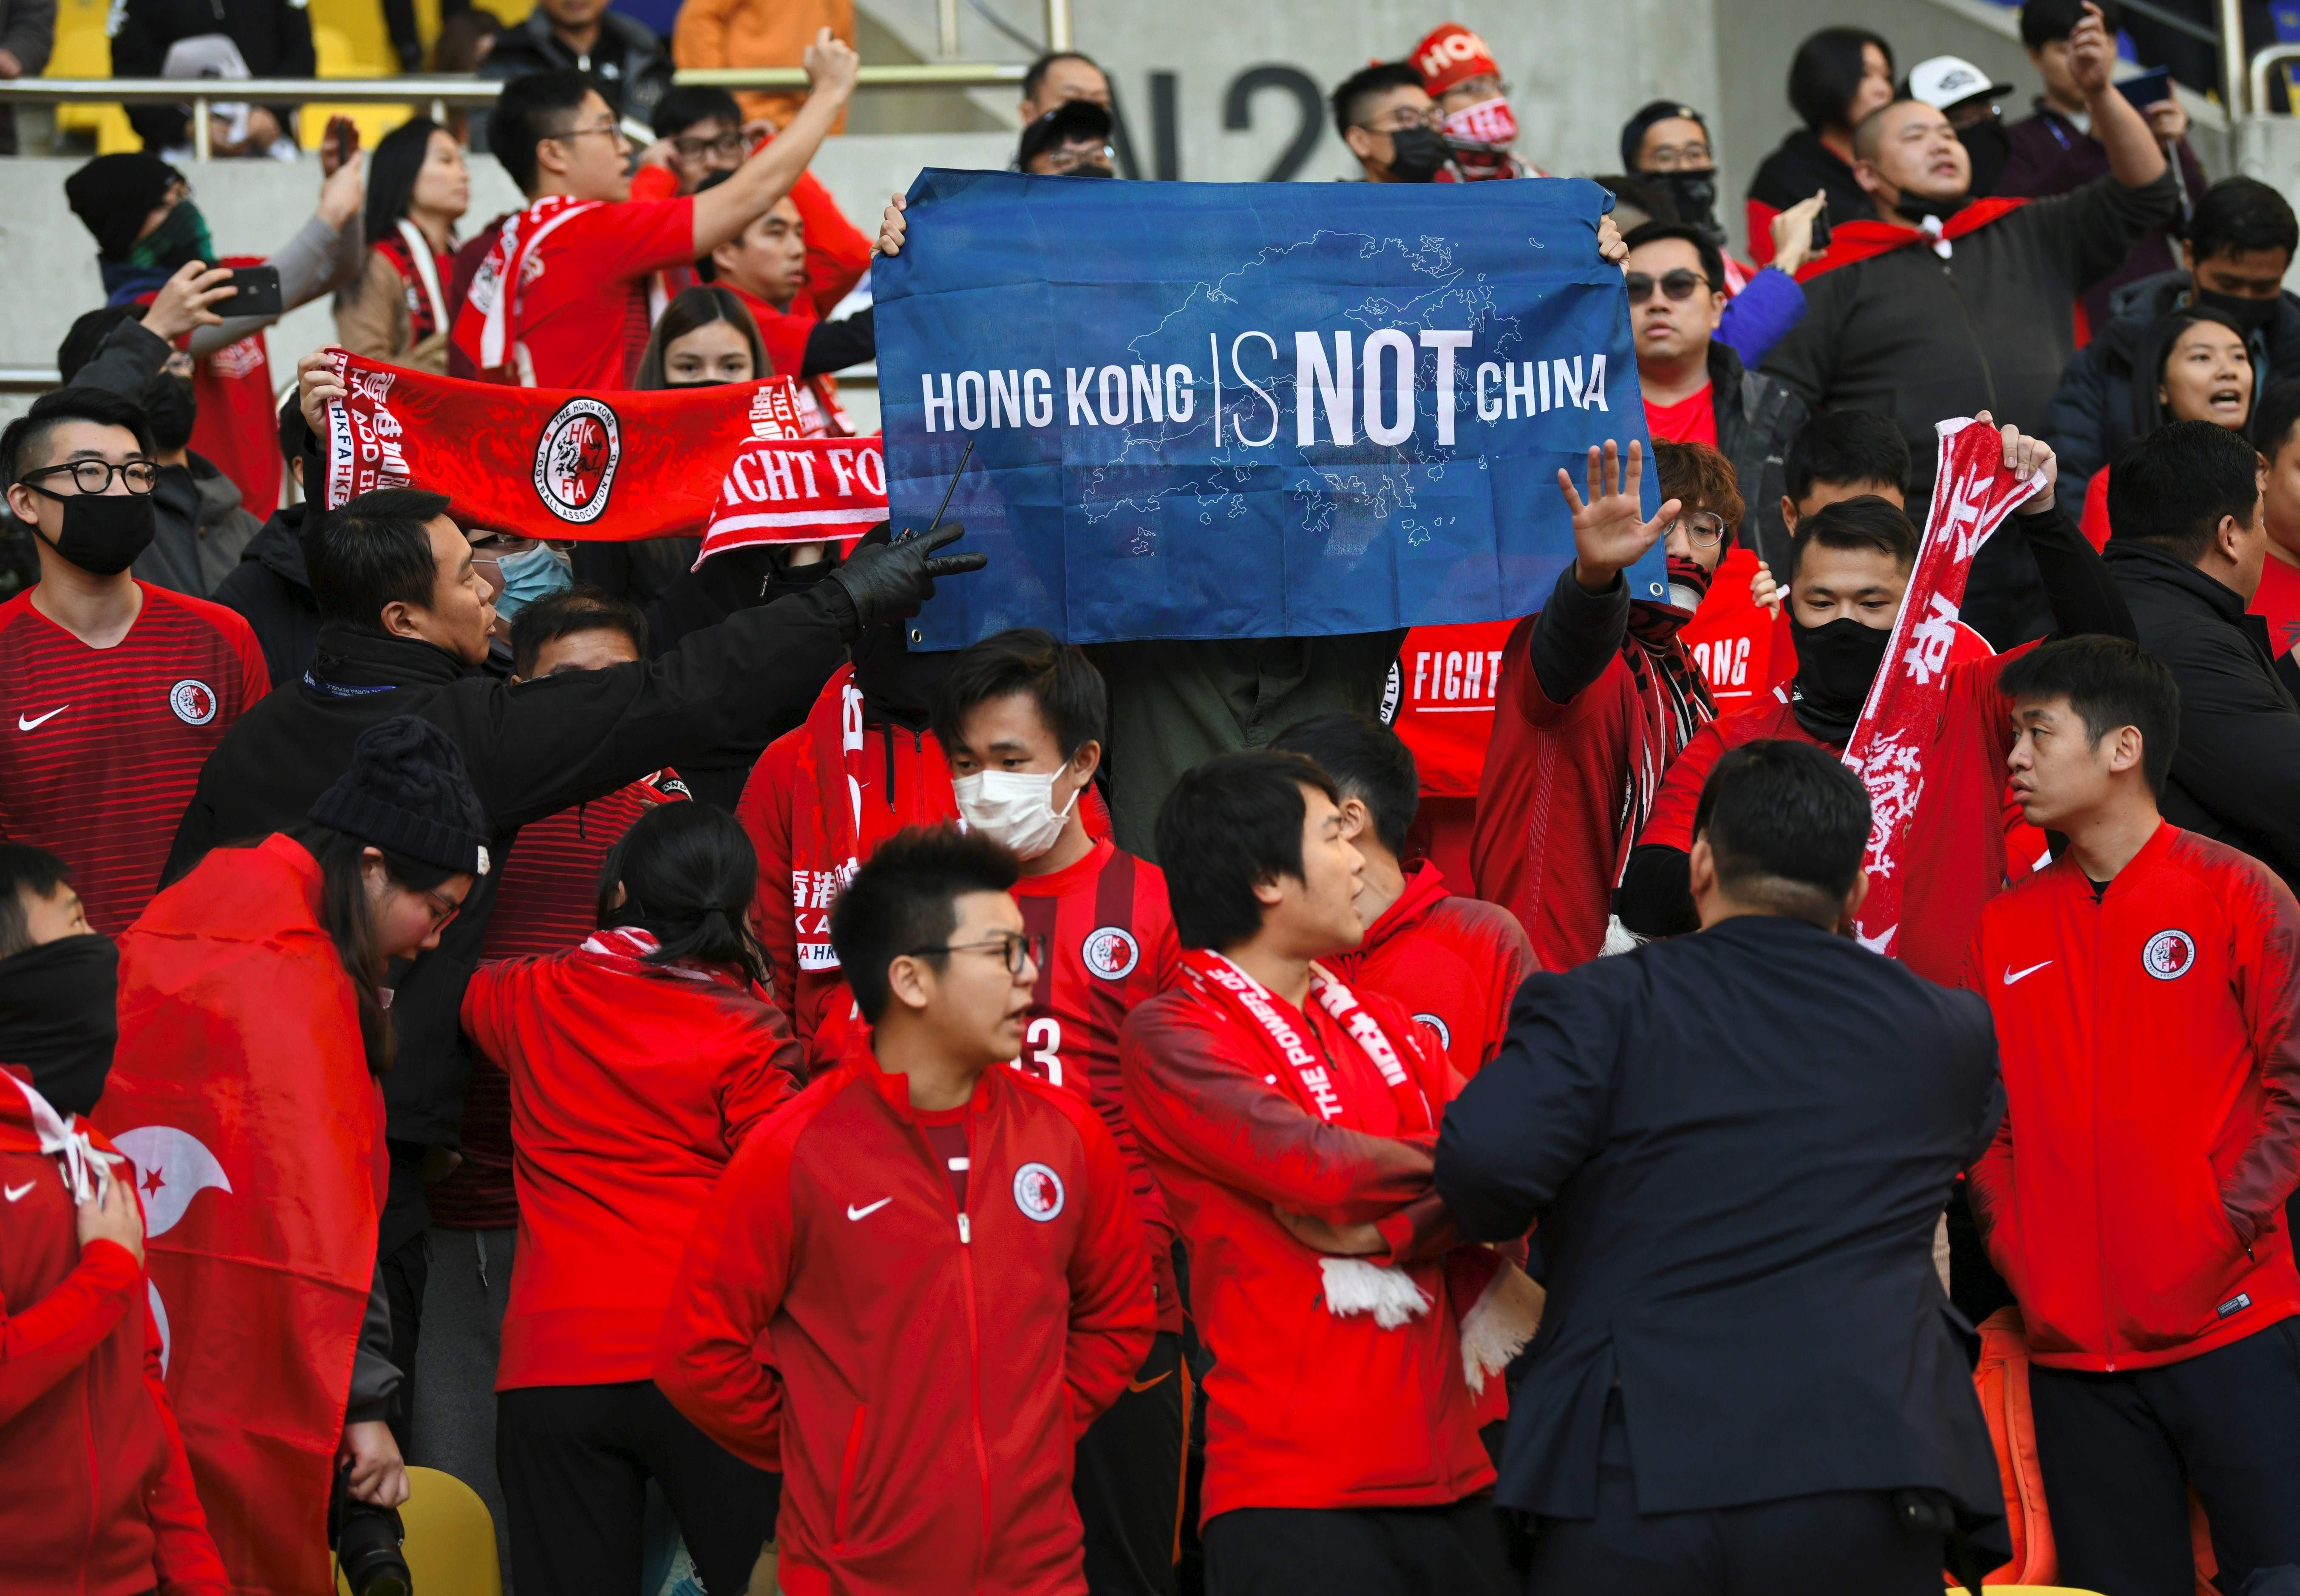 Hong Kong supporters hold a banner reading “Hong Kong is not China" as security members try to take it away match between Hong Kong and China in Busan. Photo: AFP